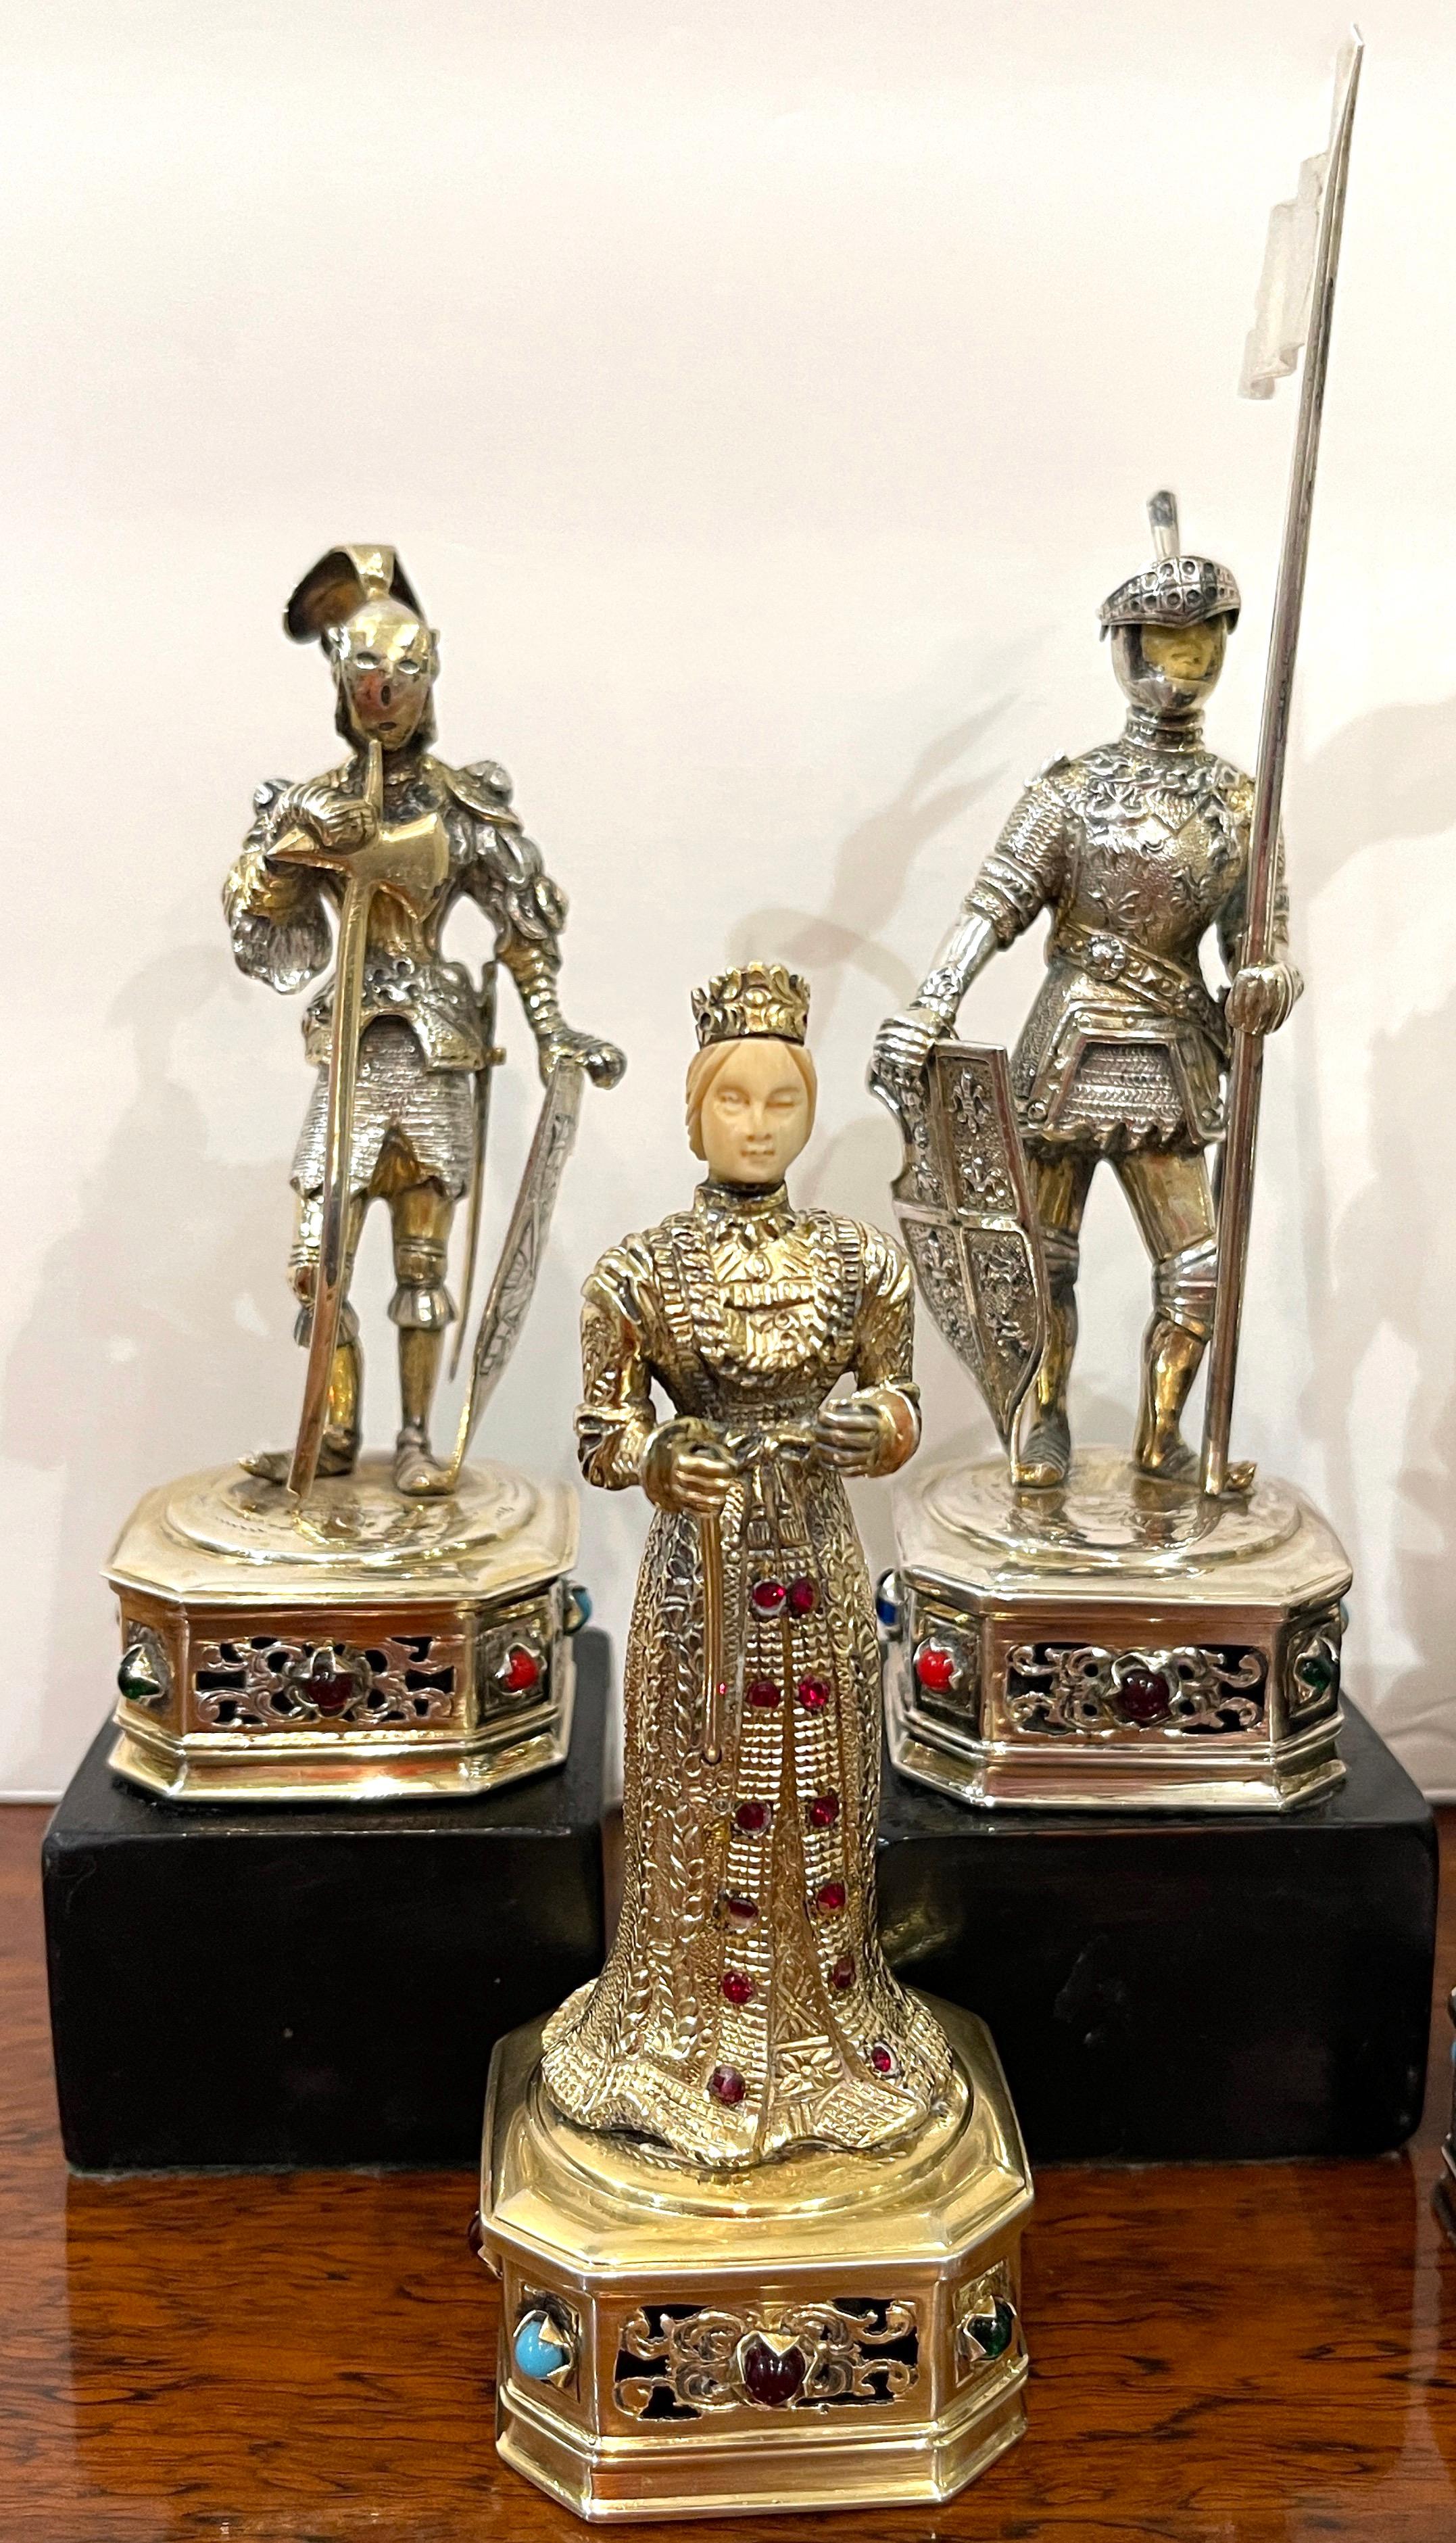 20th Century Collection of Ten Sterling Silver & Semi-Precious Stone Medieval Figures